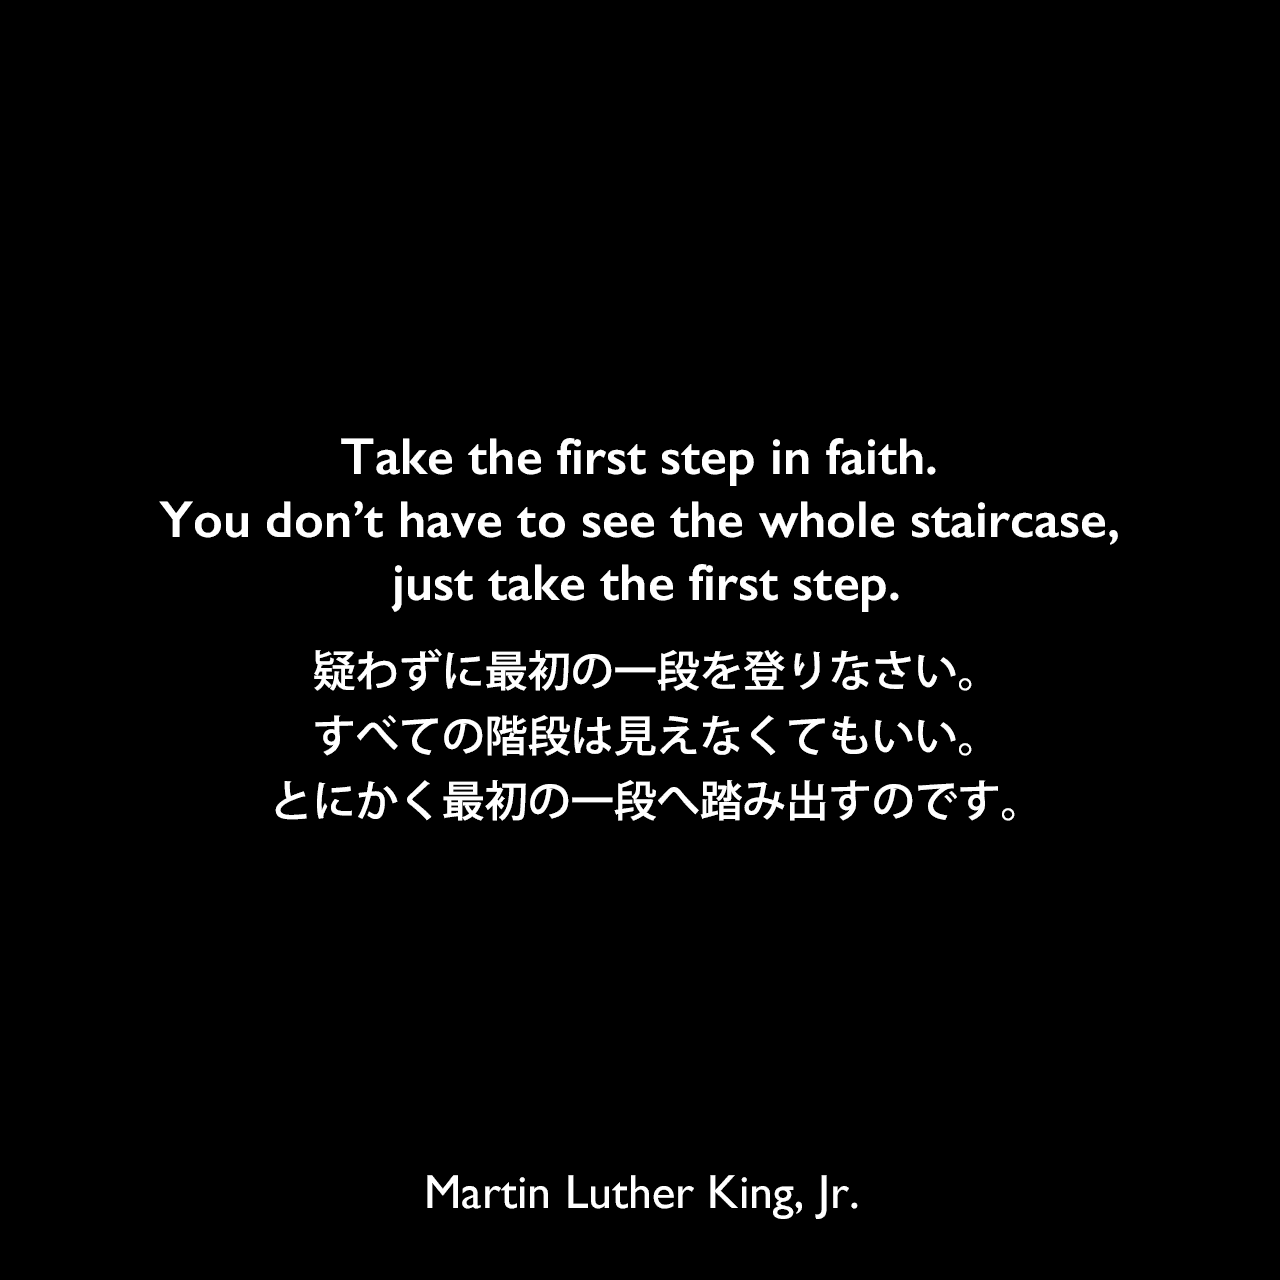 Take the first step in faith. You don’t have to see the whole staircase, just take the first step.疑わずに最初の一段を登りなさい。すべての階段は見えなくてもいい。とにかく最初の一段へ踏み出すのです。